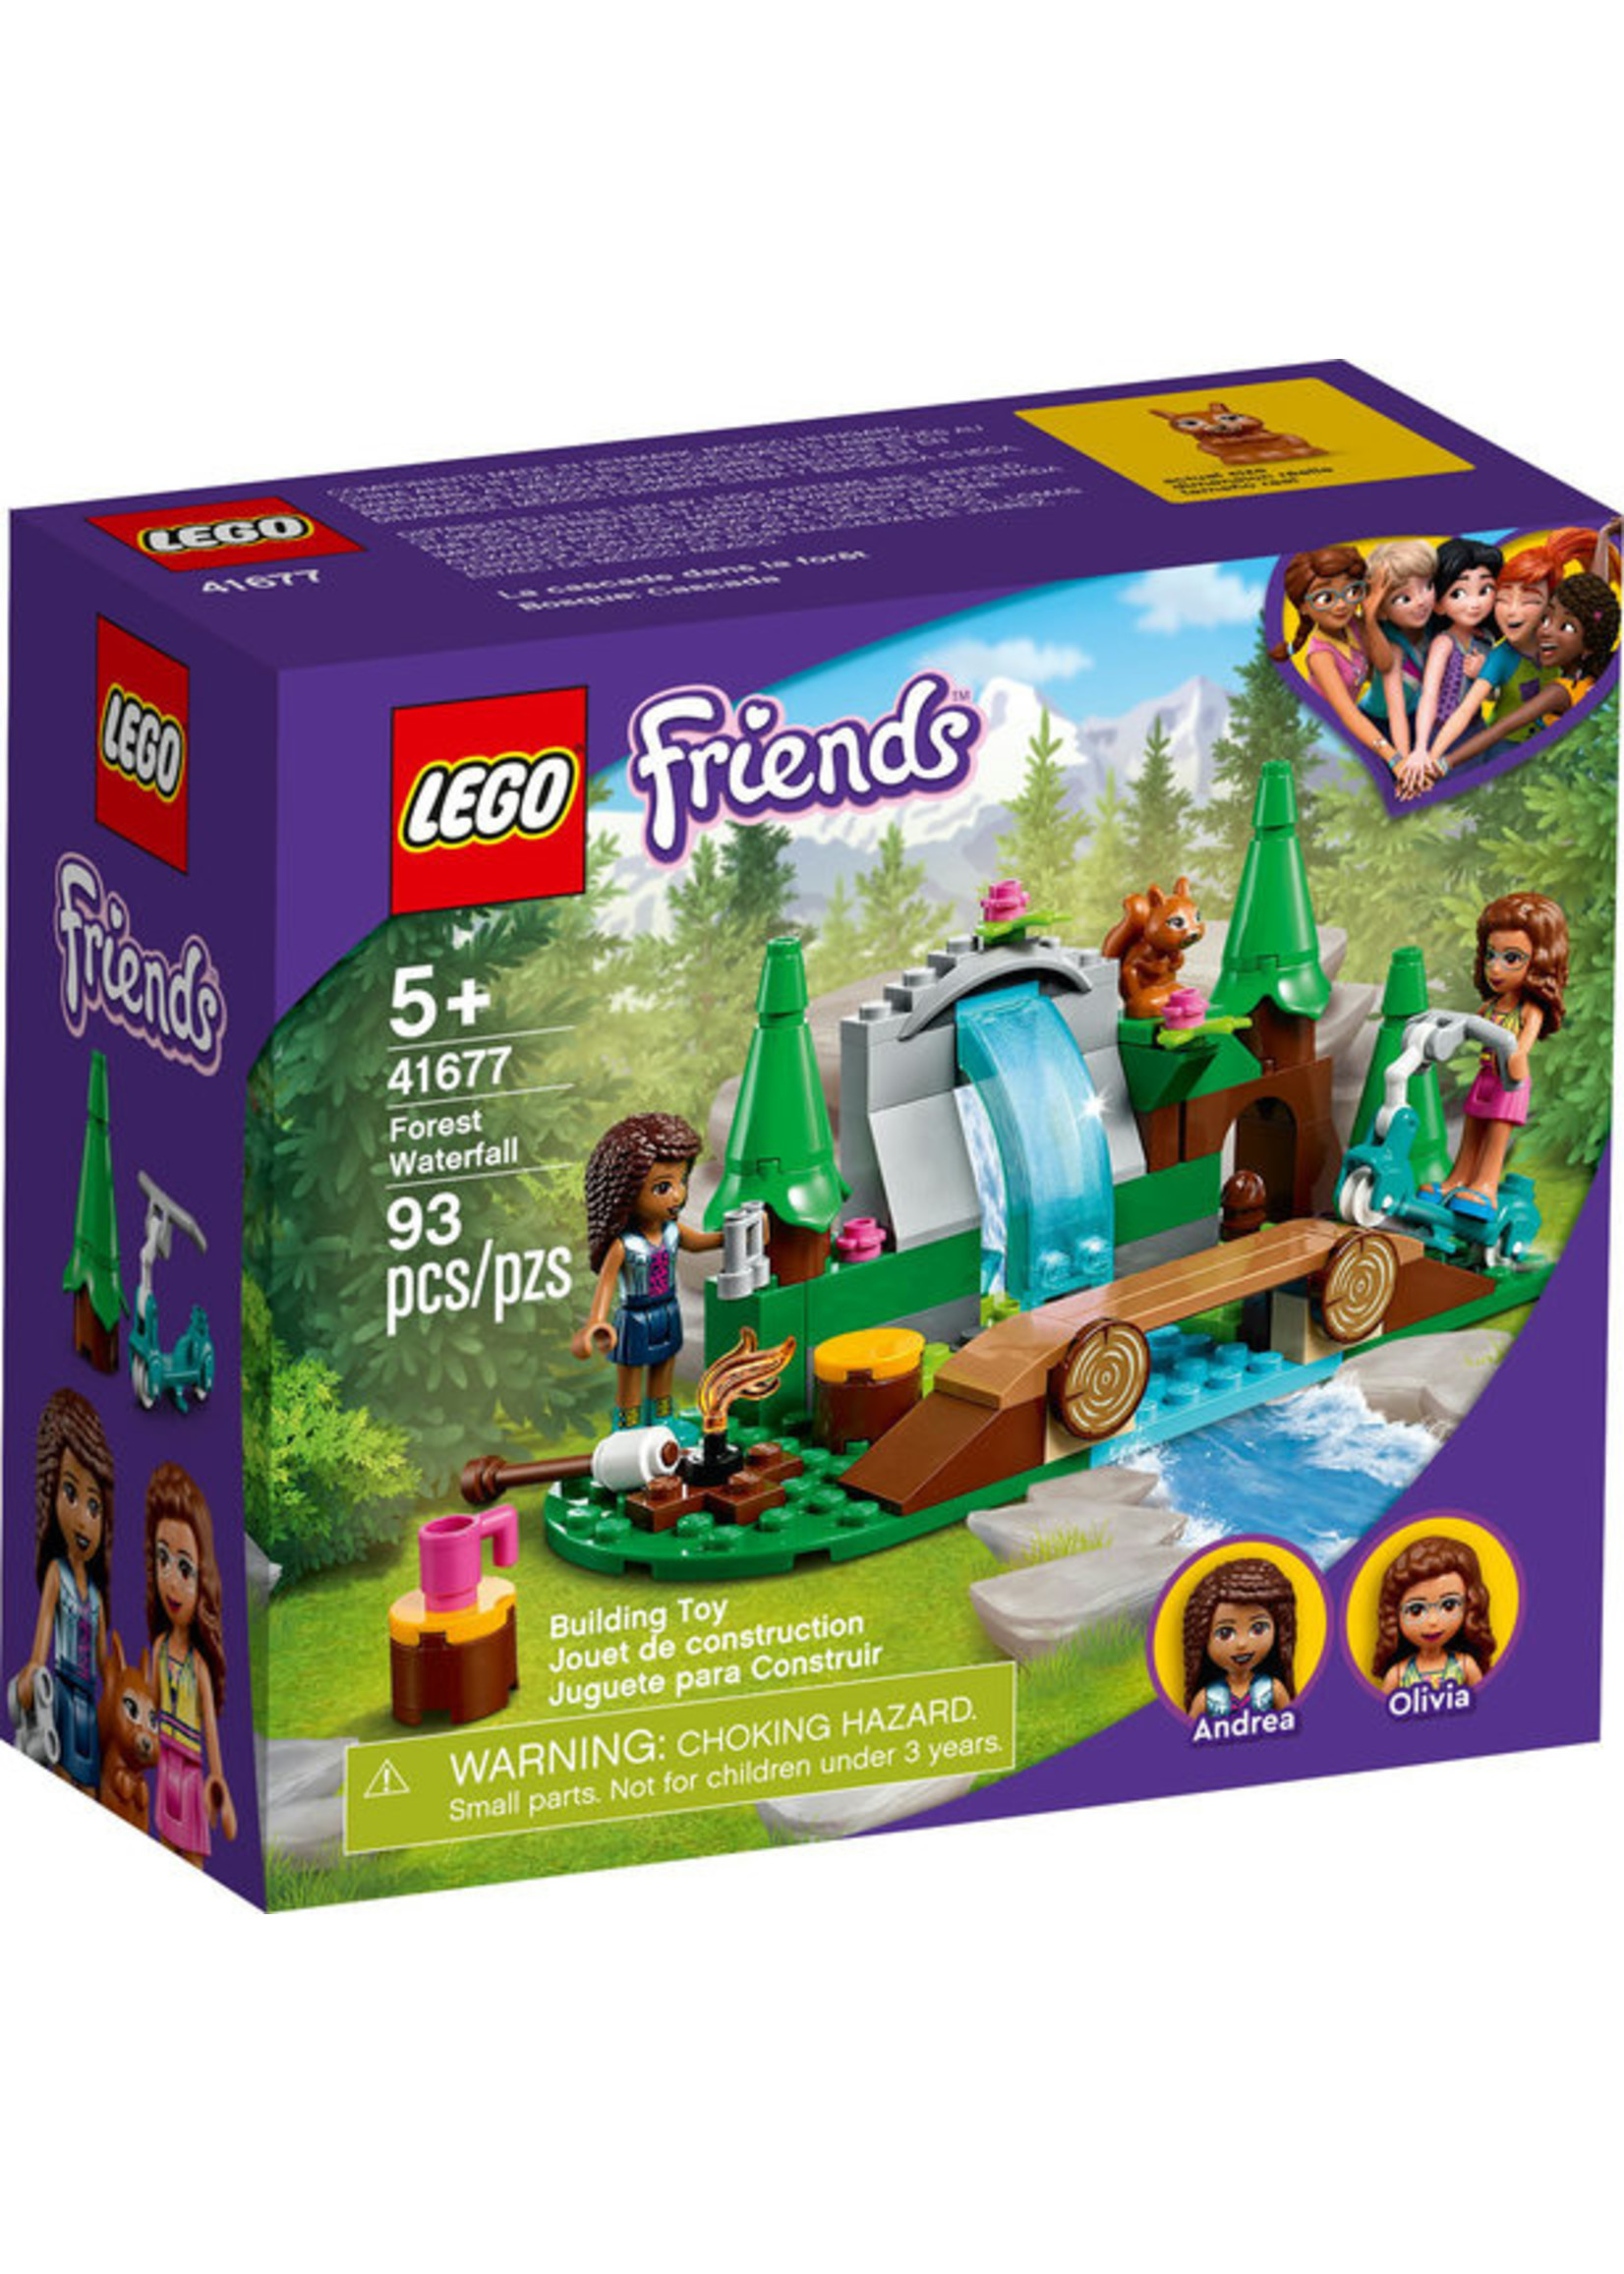 LEGO 41677 - Forest Waterfall